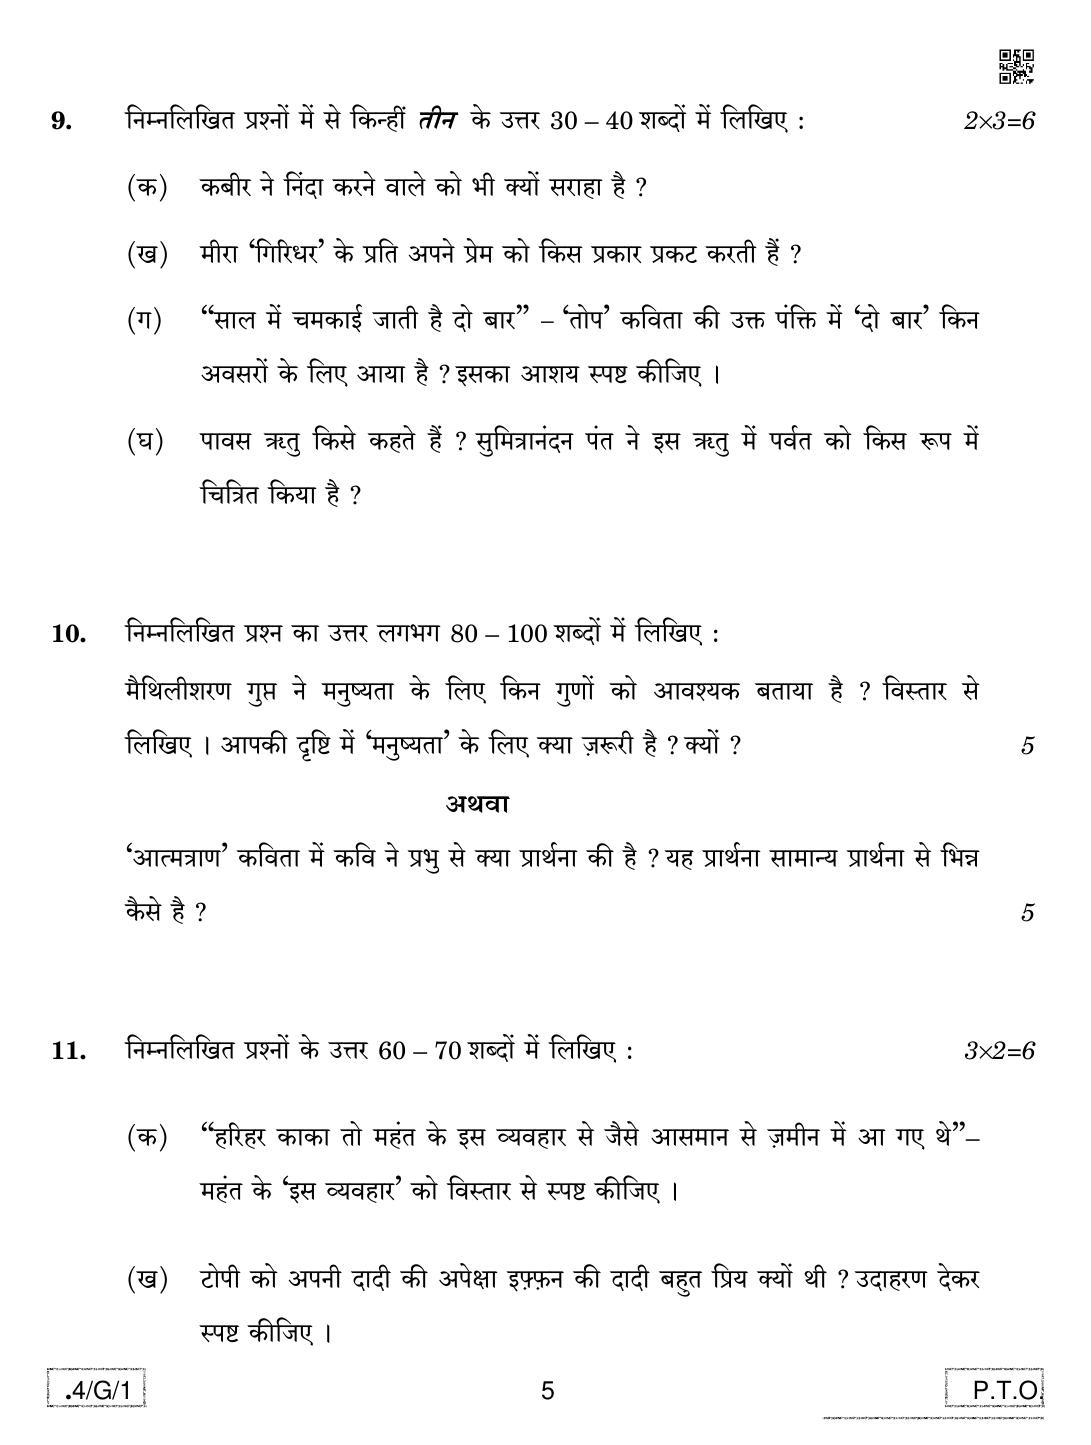 CBSE Class 10 4-C-1 Hindi B 2020 Compartment Question Paper - Page 5